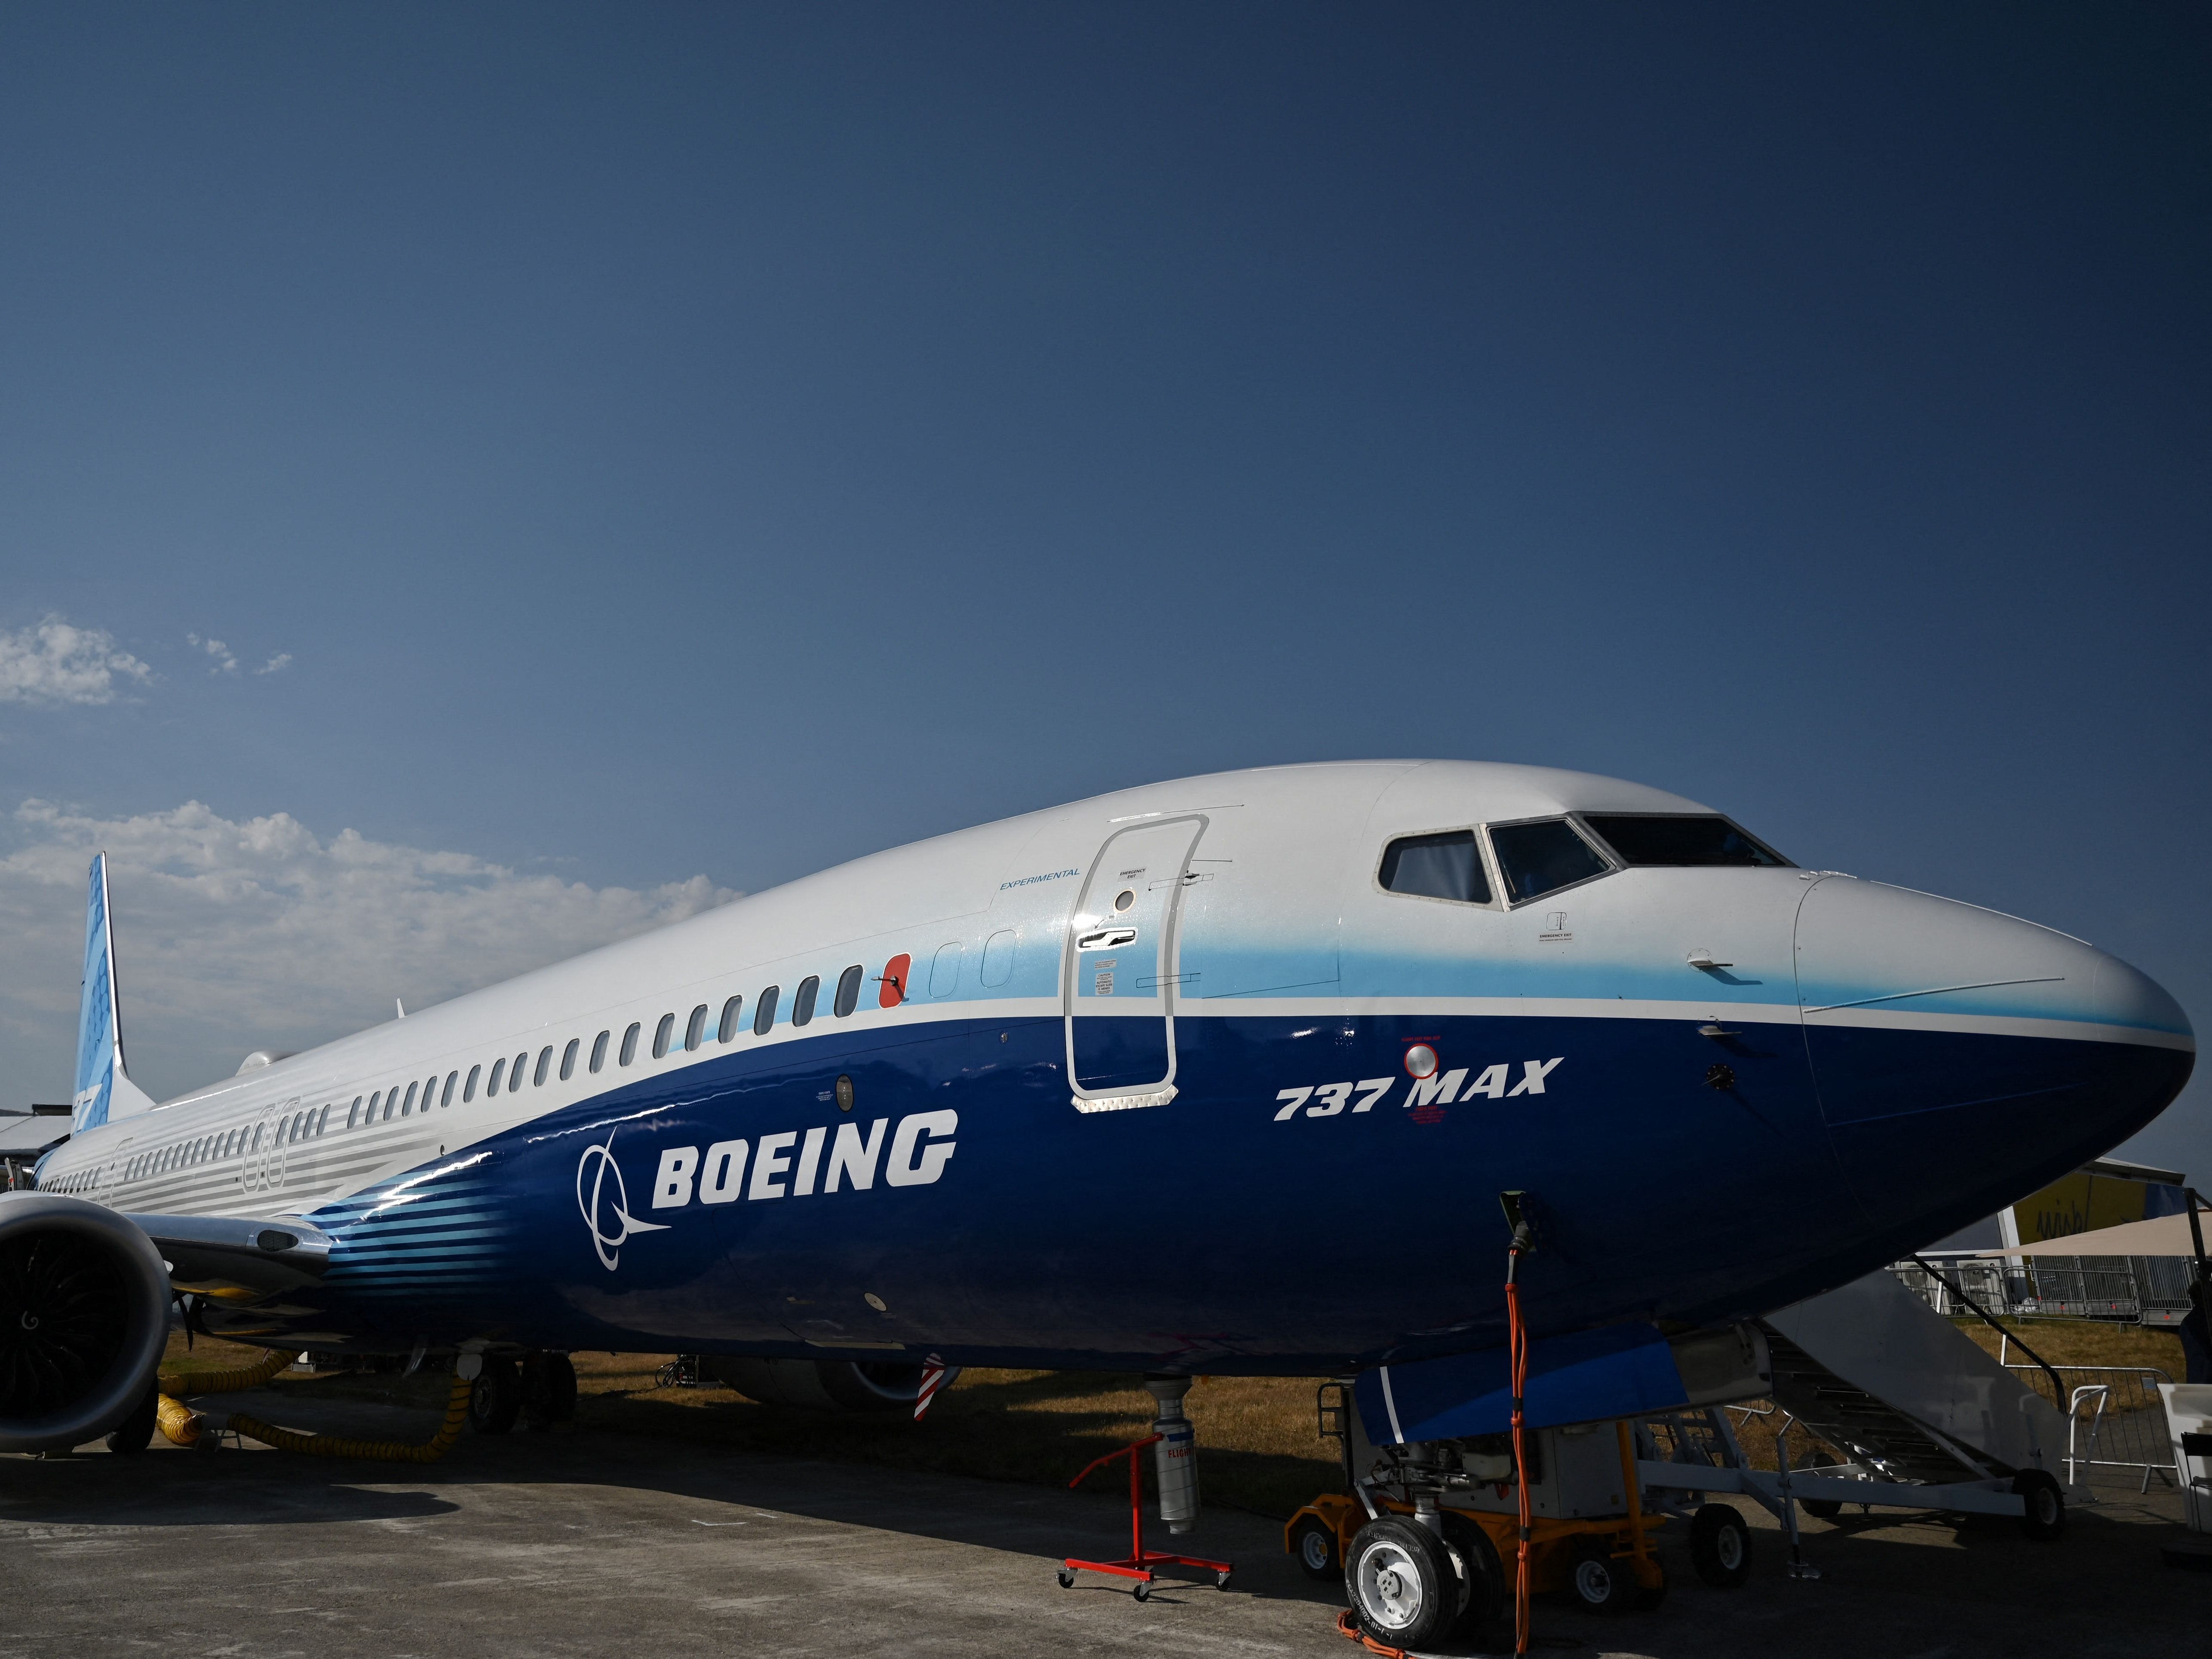 Boeing broke an agreement over the 737 Max crashes that killed 346 people, and could now be prosecuted, the Justice Department says